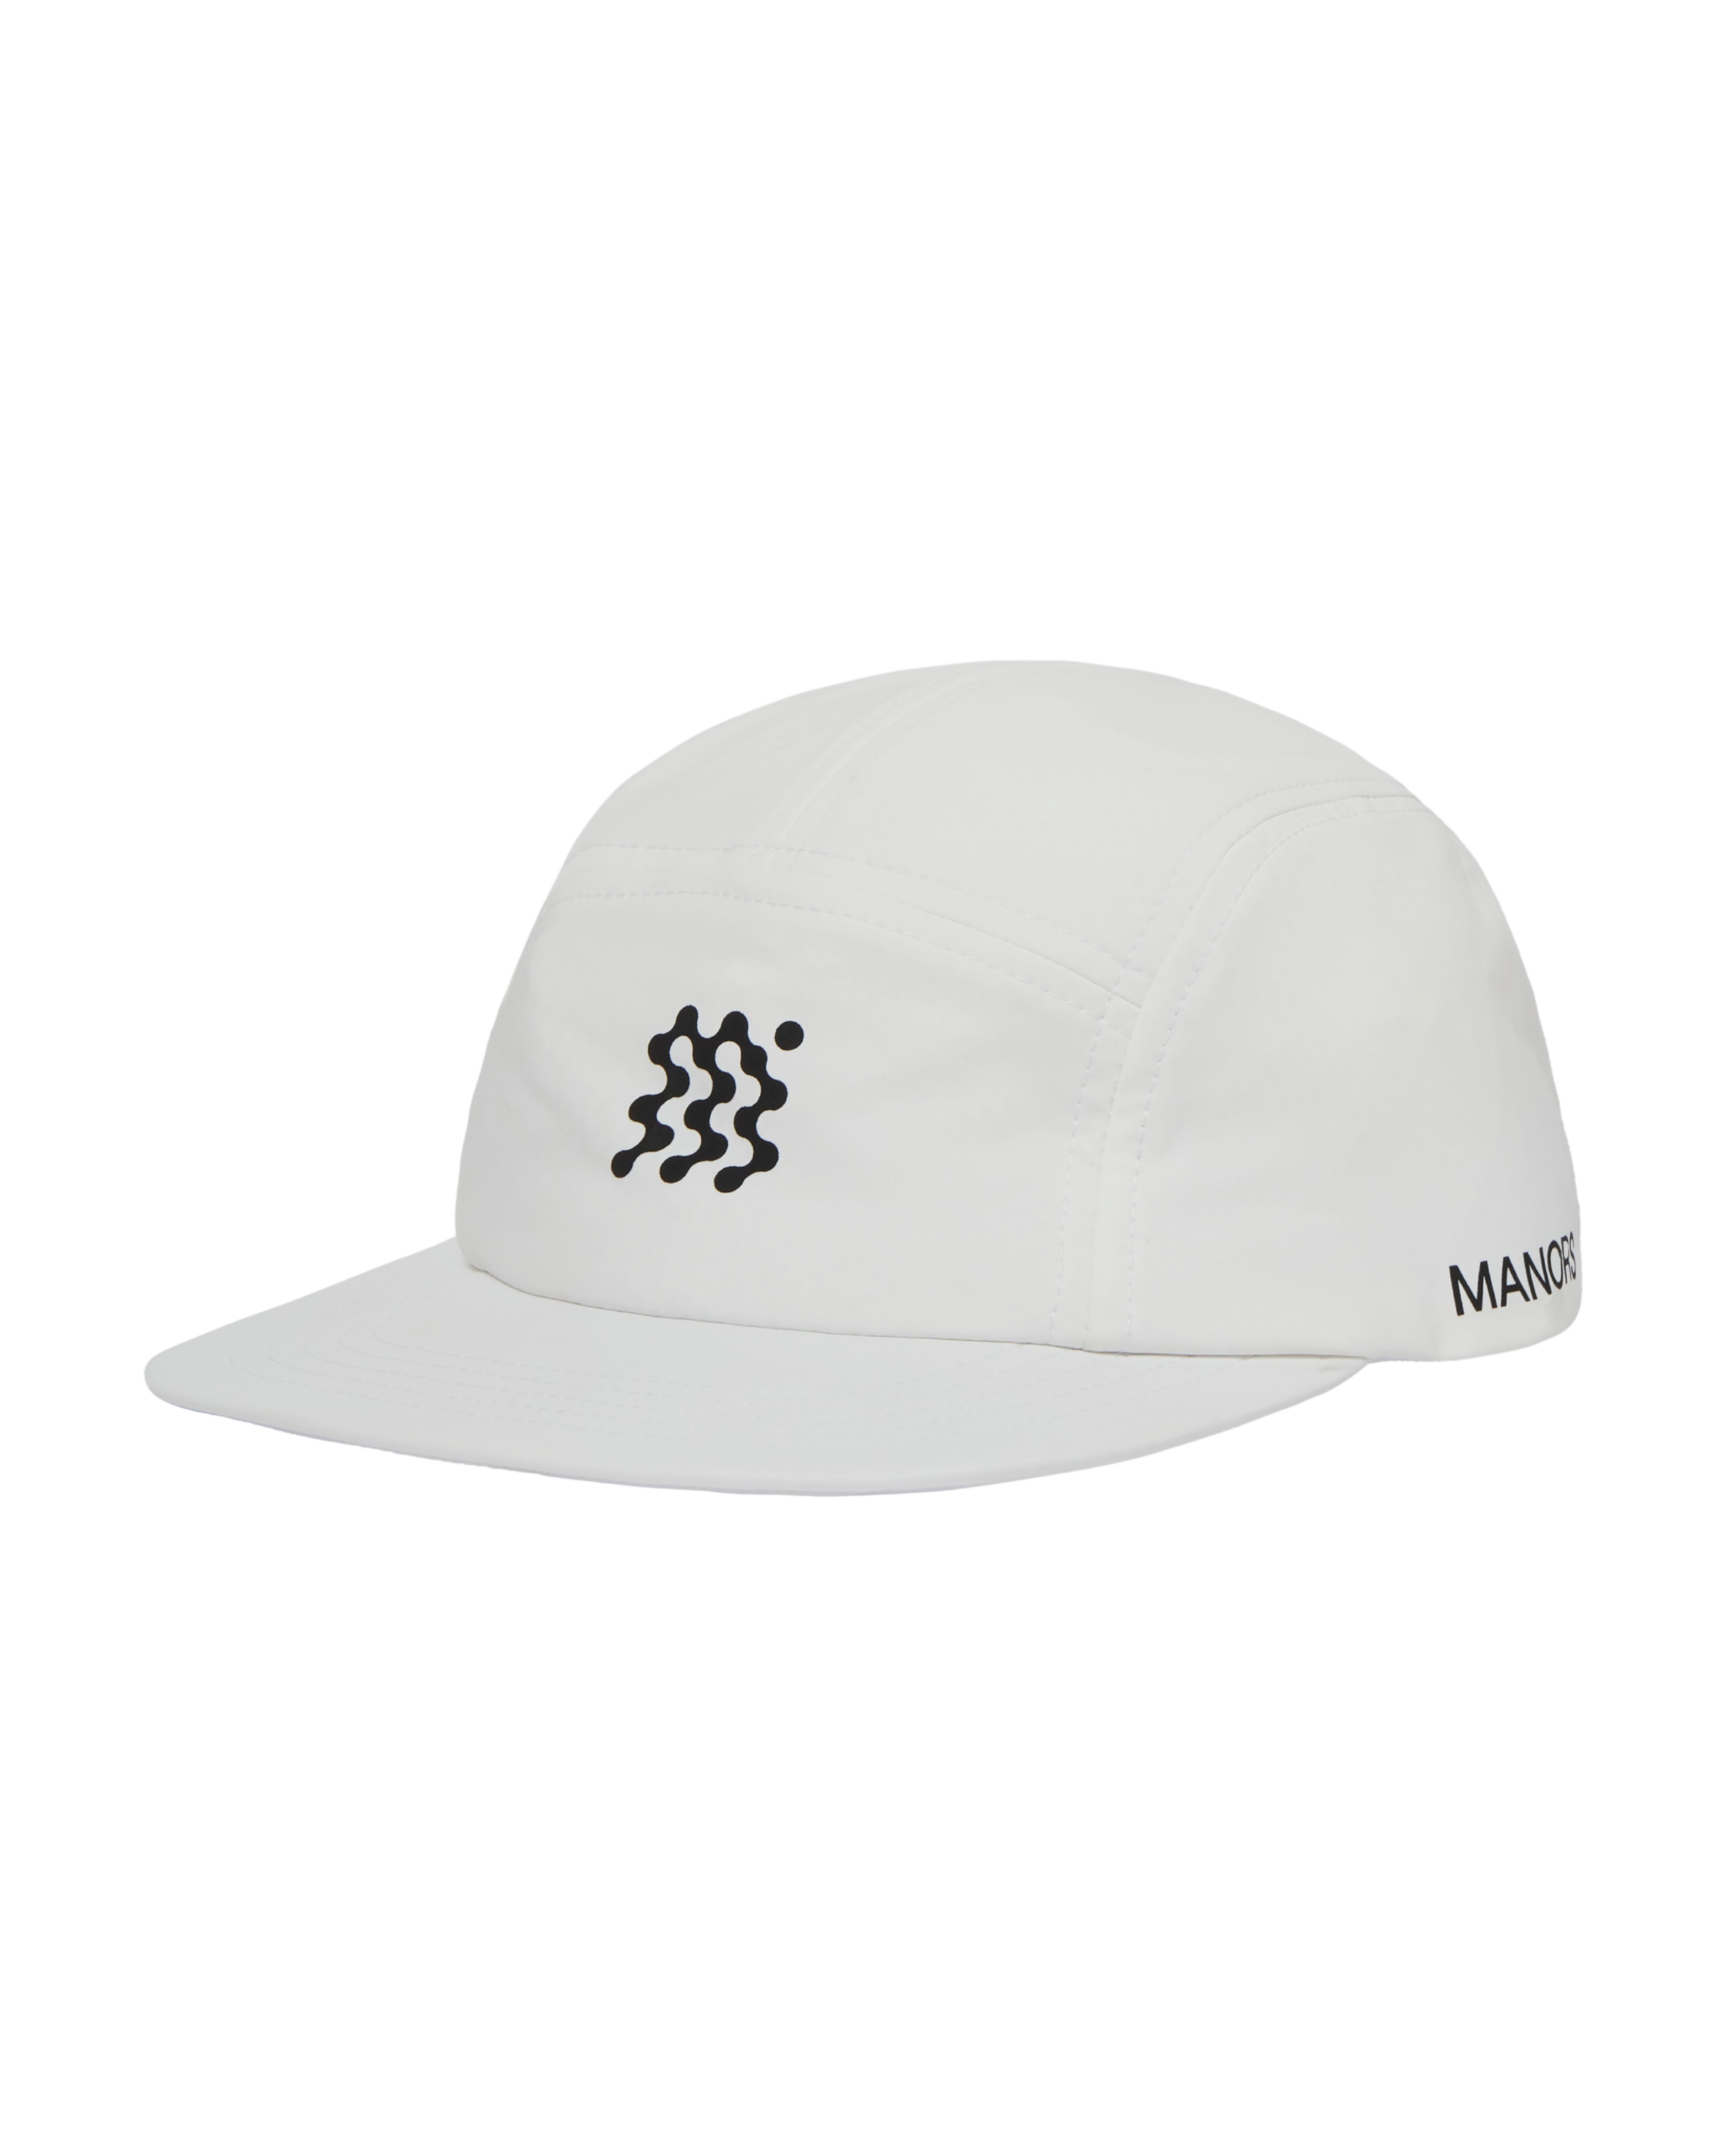 MANORS Frontier Tech Cap | golf and sports fashion brands at agorabkk 